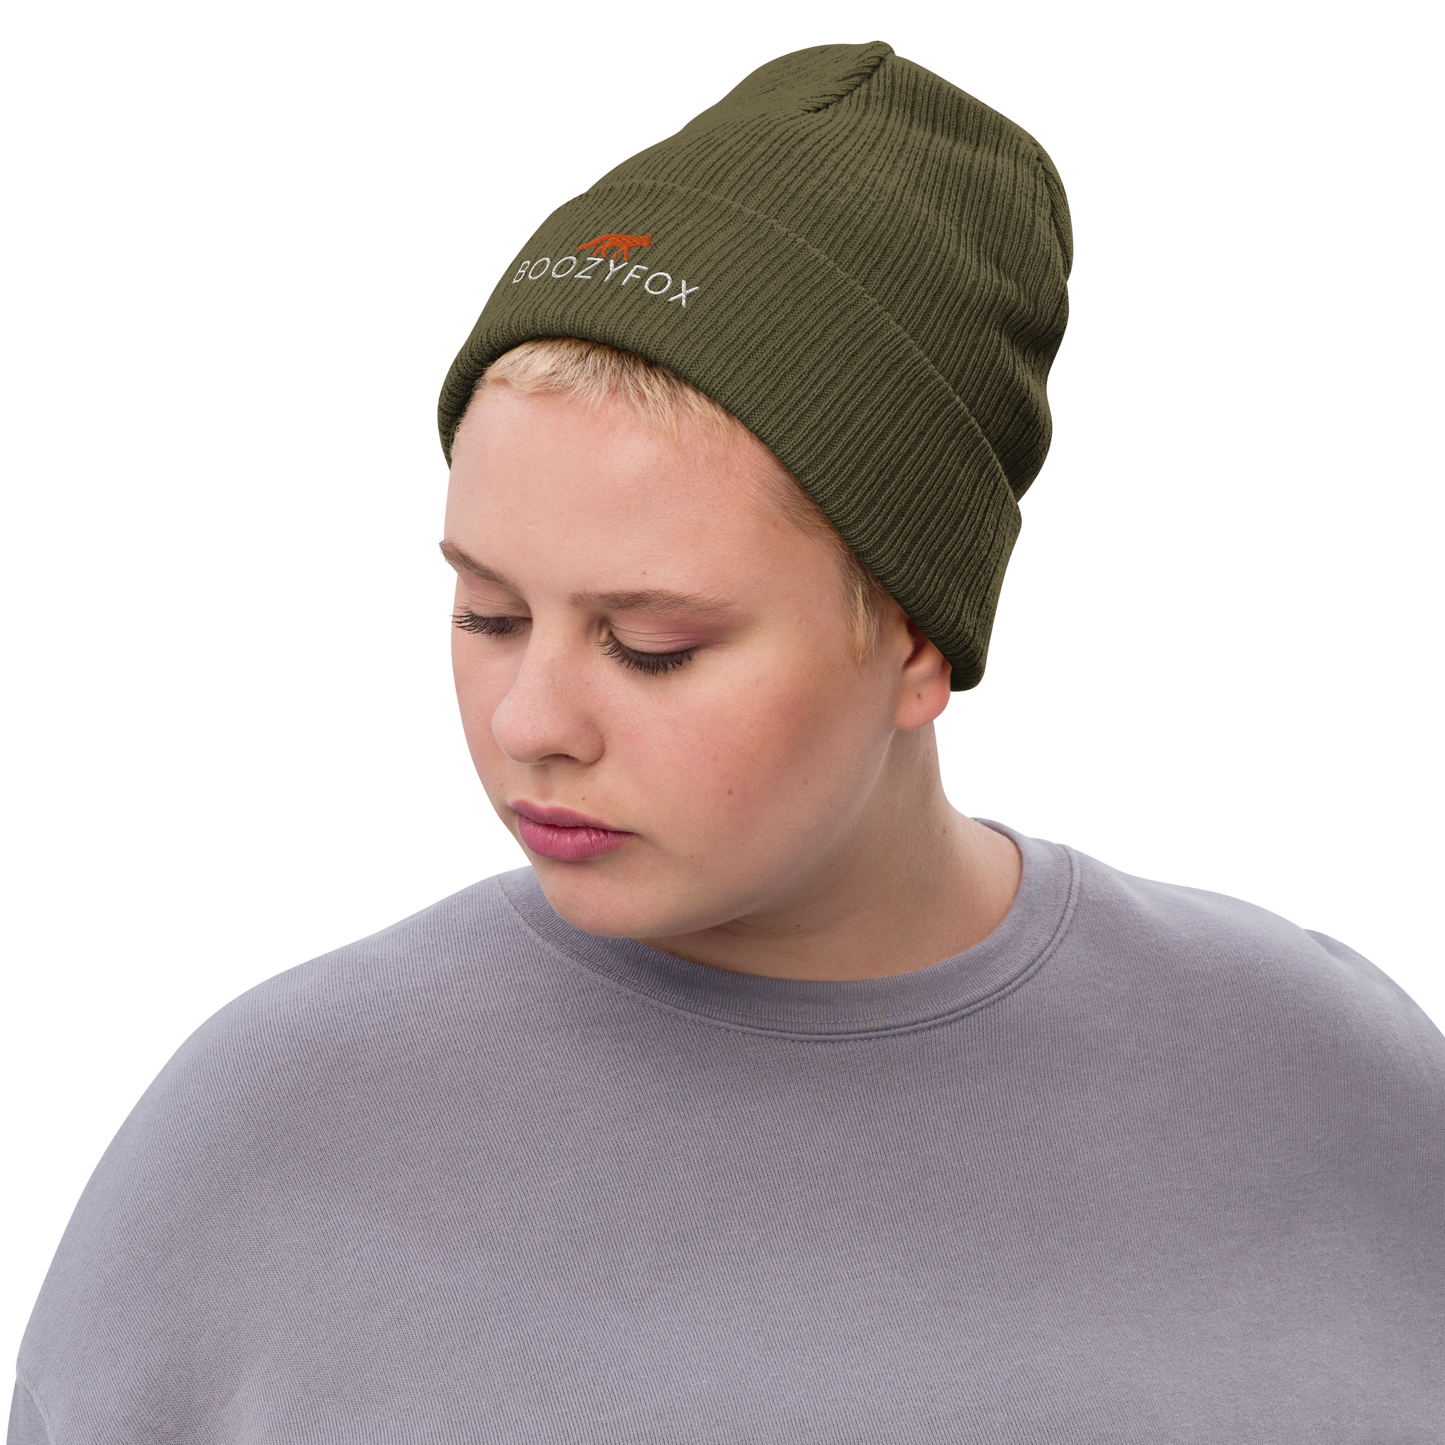 Woman wearing a Olive Green Ribbed Knit Beanie With An Embroidered Boozy Fox Logo On Fold - Shop Beanies Online - Boozy Fox